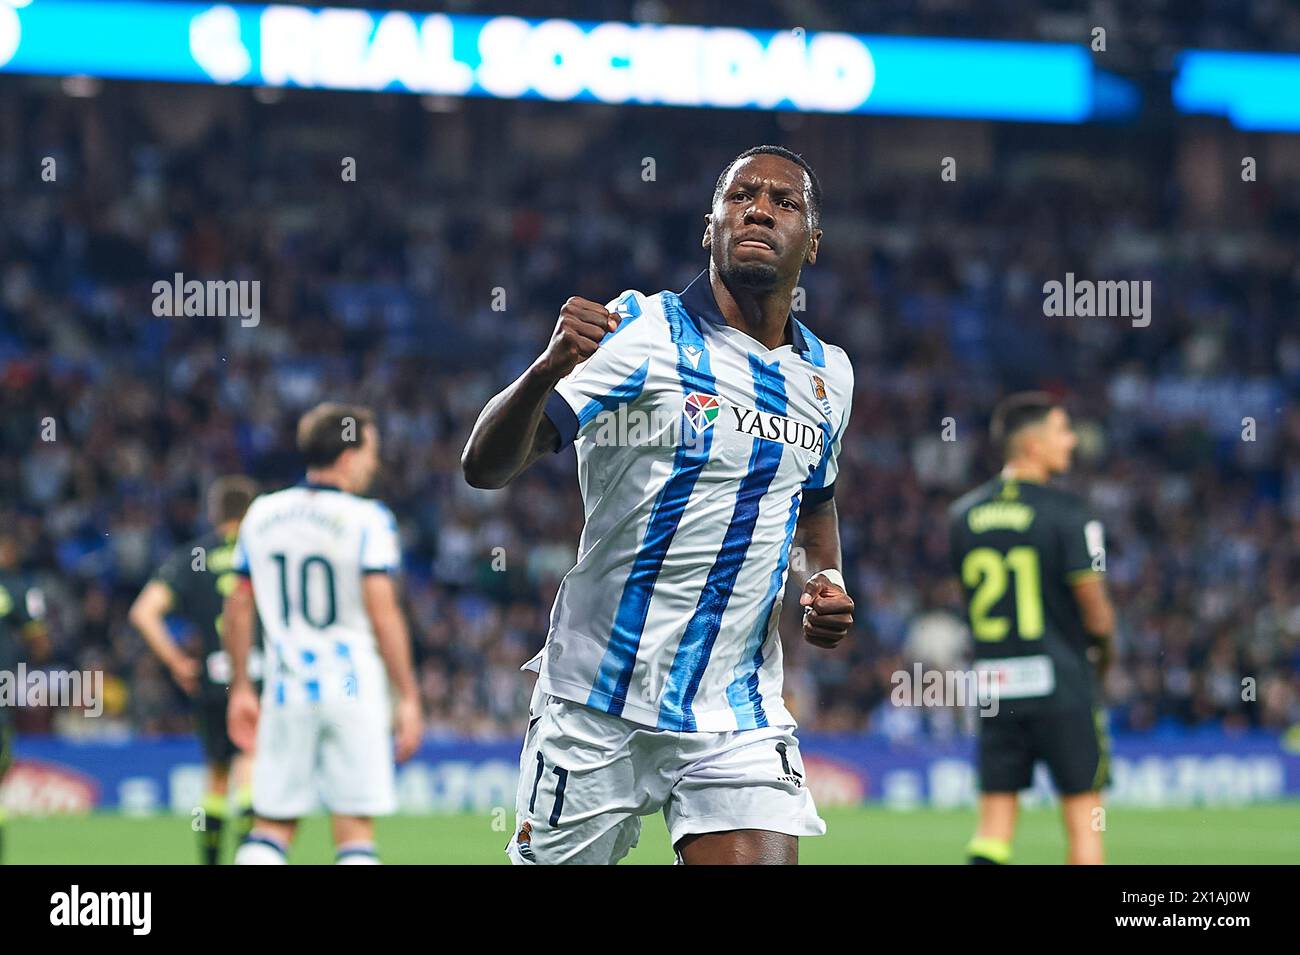 Sheraldo Becker of Real Sociedad celebrates after scoring his team's first goal during the LaLiga EA Sports match between Real Sociedad and UD Almeria Stock Photo